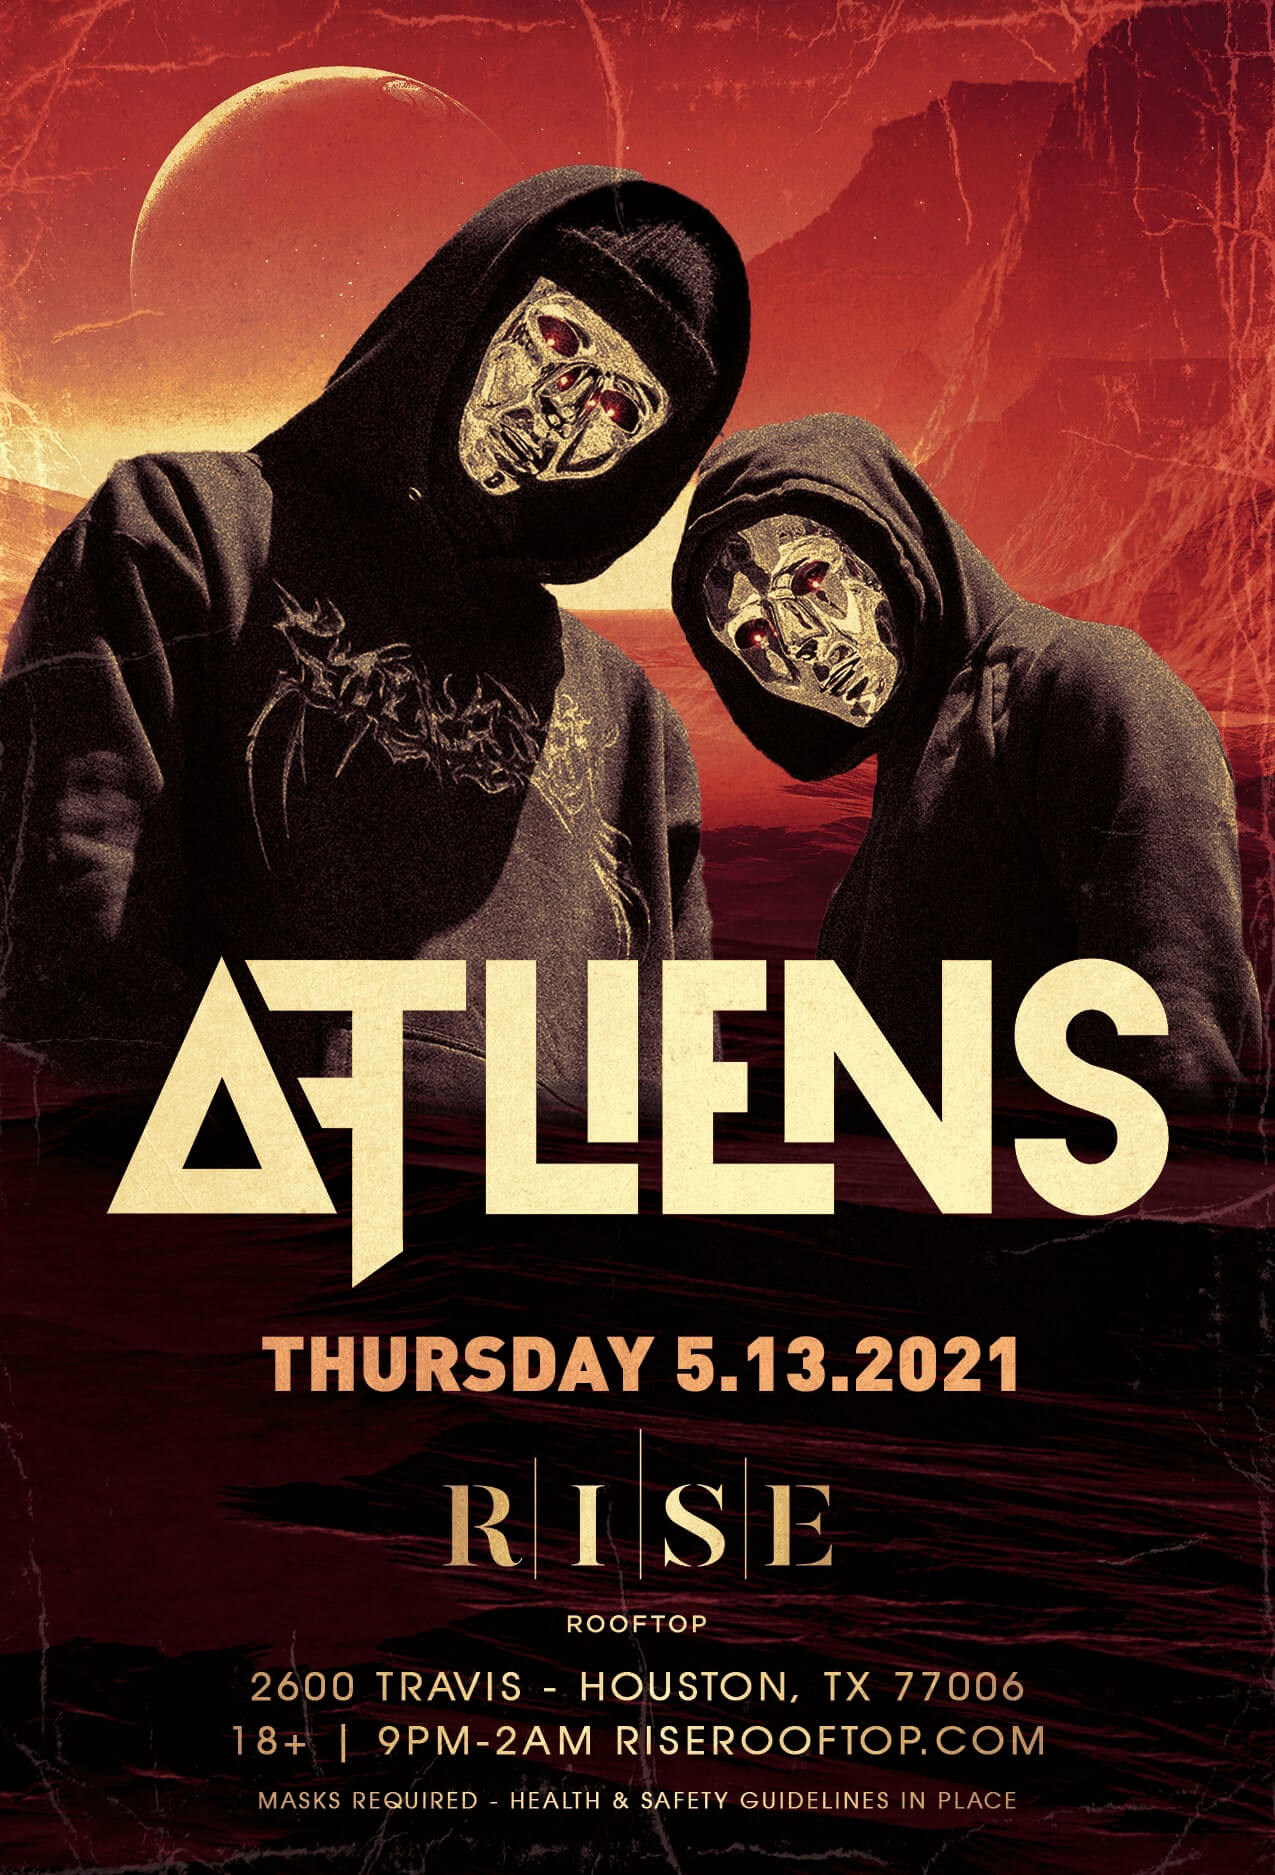 ATLiens at RISE Rooftop